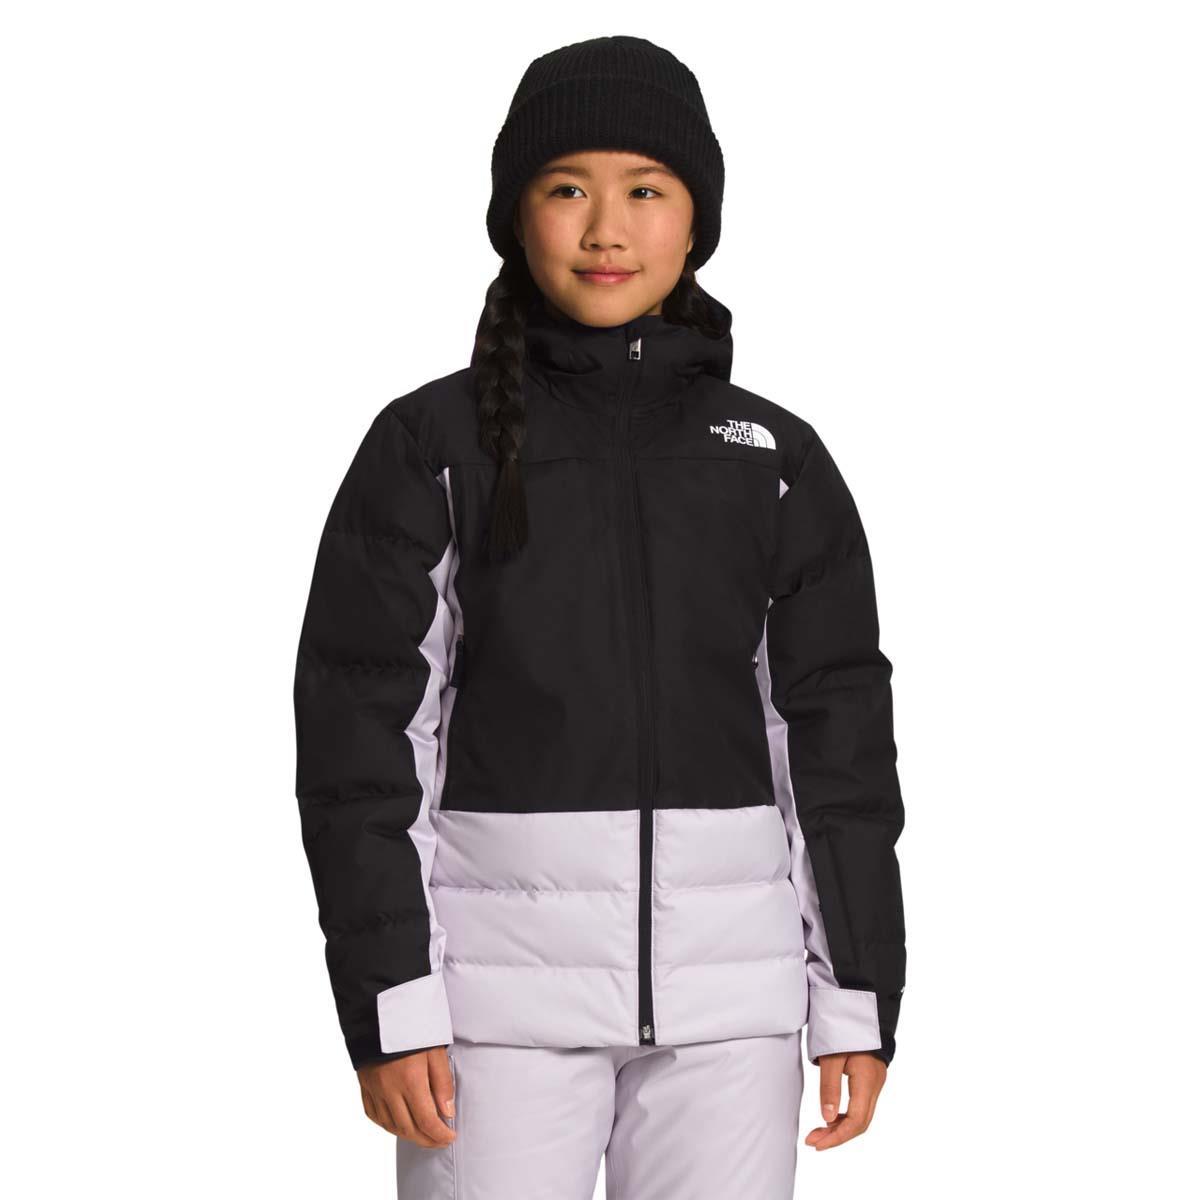 THE NORTH FACE Women's Winter Warm ¼ Zip, Lavender Fog, X-Small at